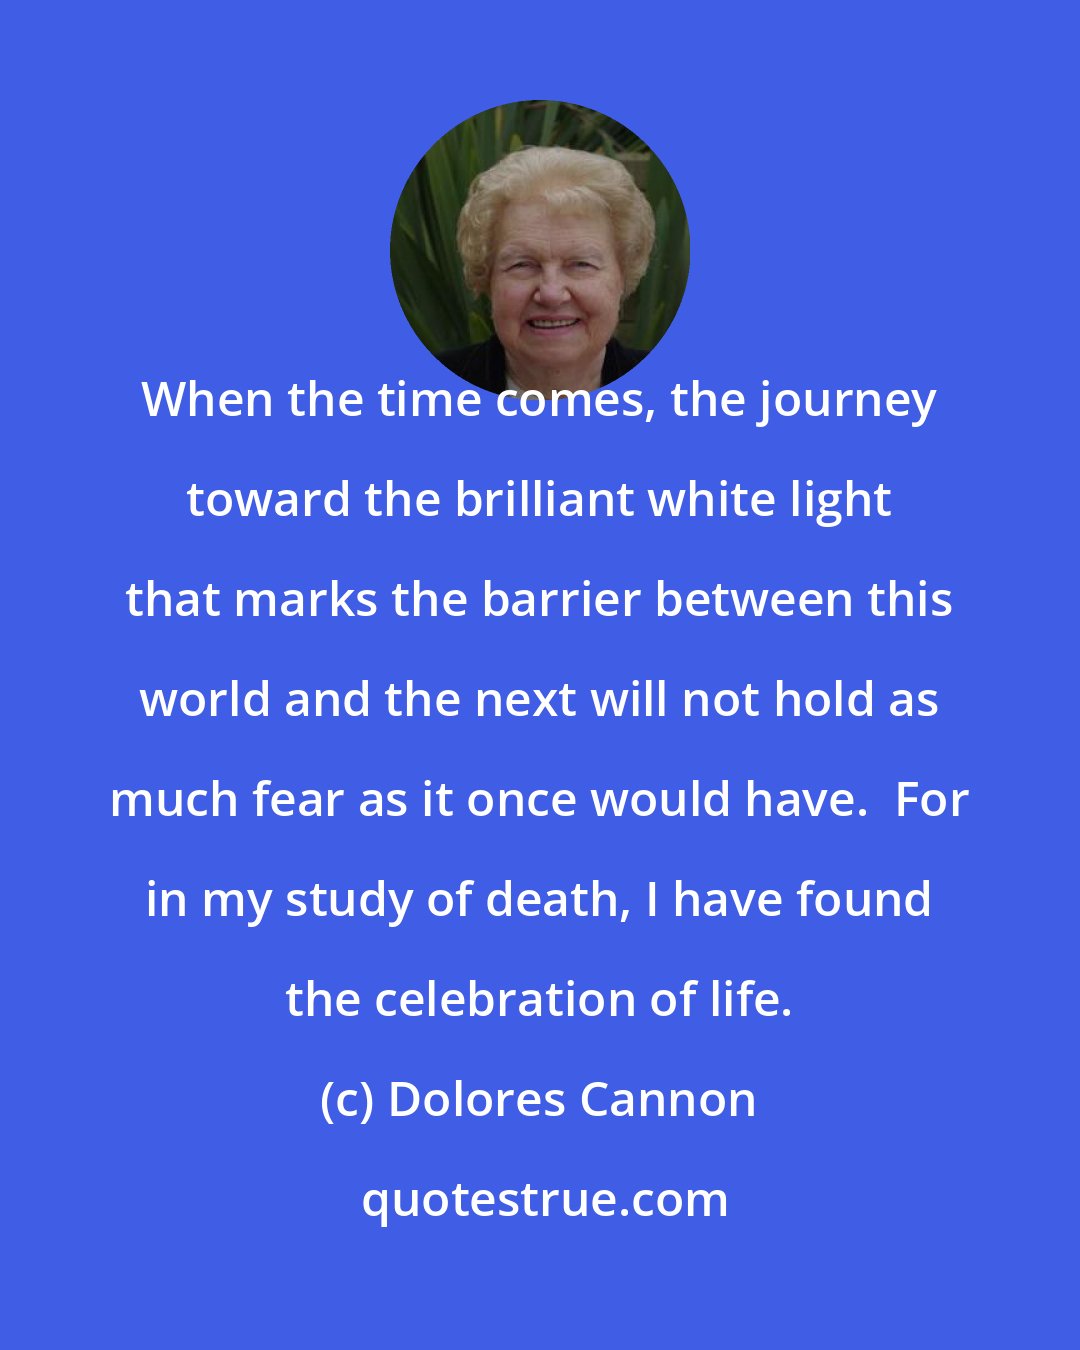 Dolores Cannon: When the time comes, the journey toward the brilliant white light that marks the barrier between this world and the next will not hold as much fear as it once would have.  For in my study of death, I have found the celebration of life.